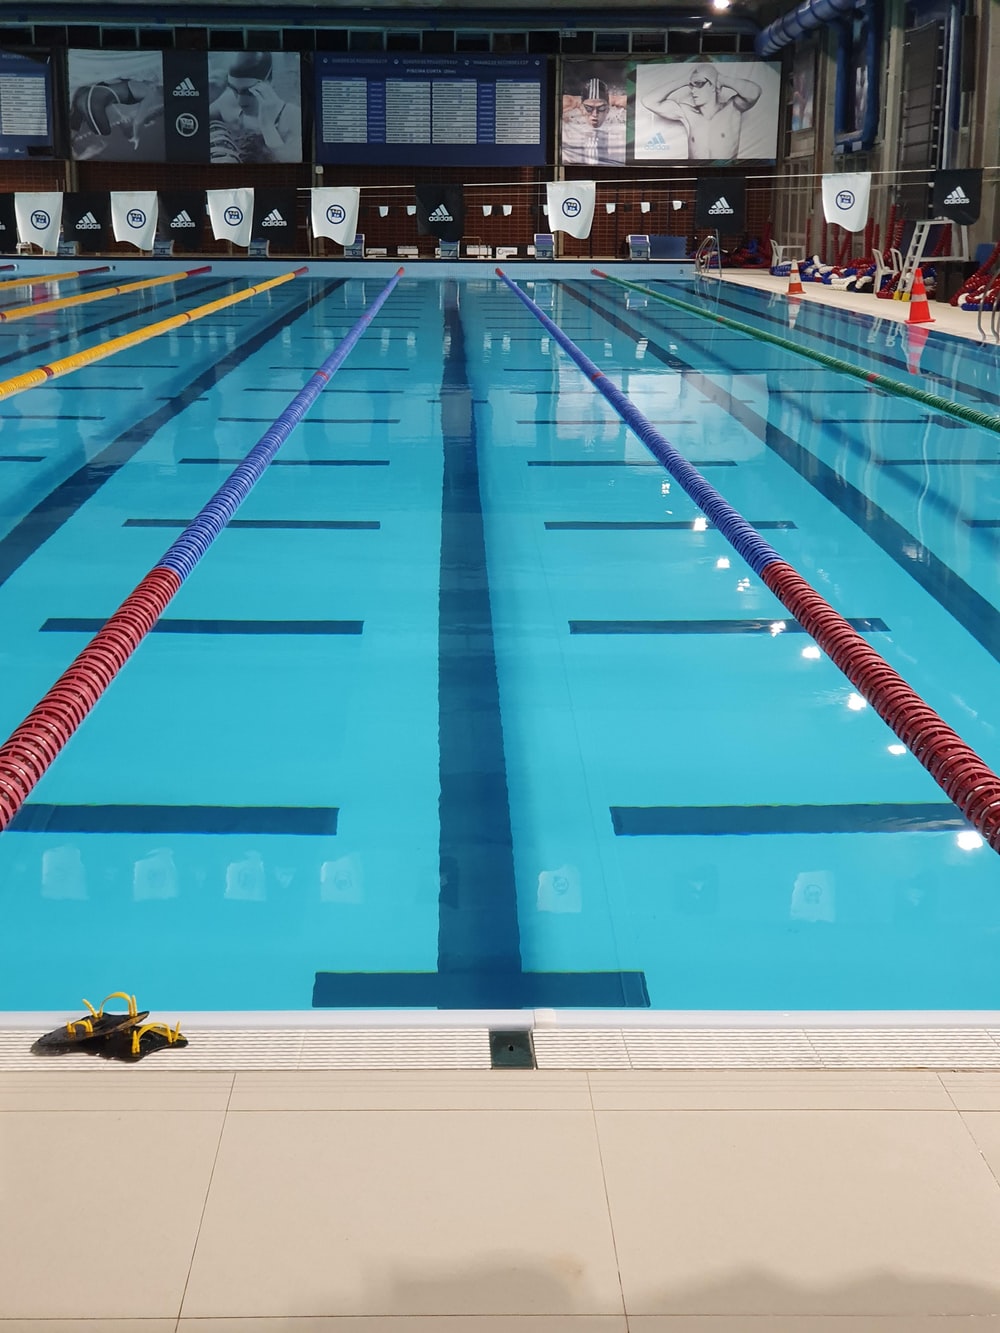 Olympic Pool Picture. Download Free Image